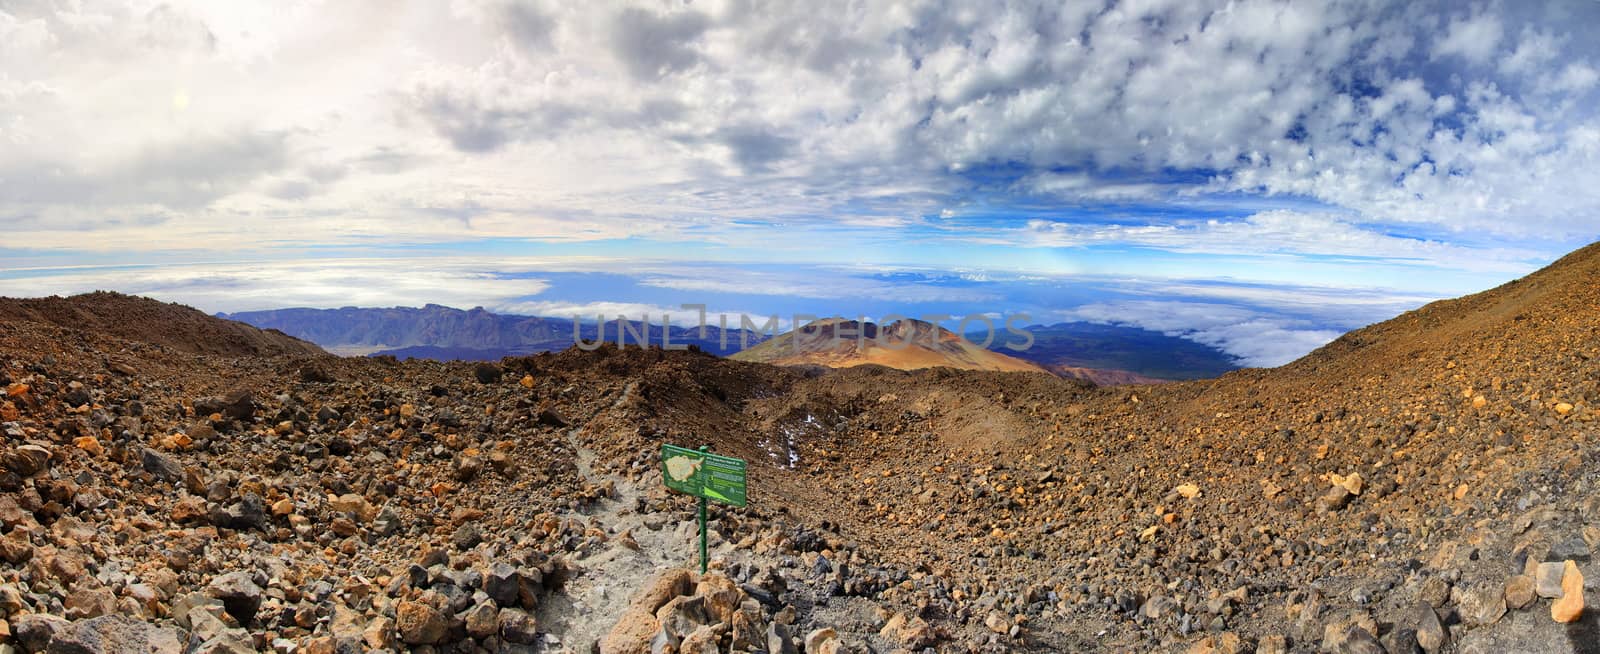 Stones and clouds on the top of Teide volcano, Panorama, Tenerife, Canarian Islands by Eagle2308